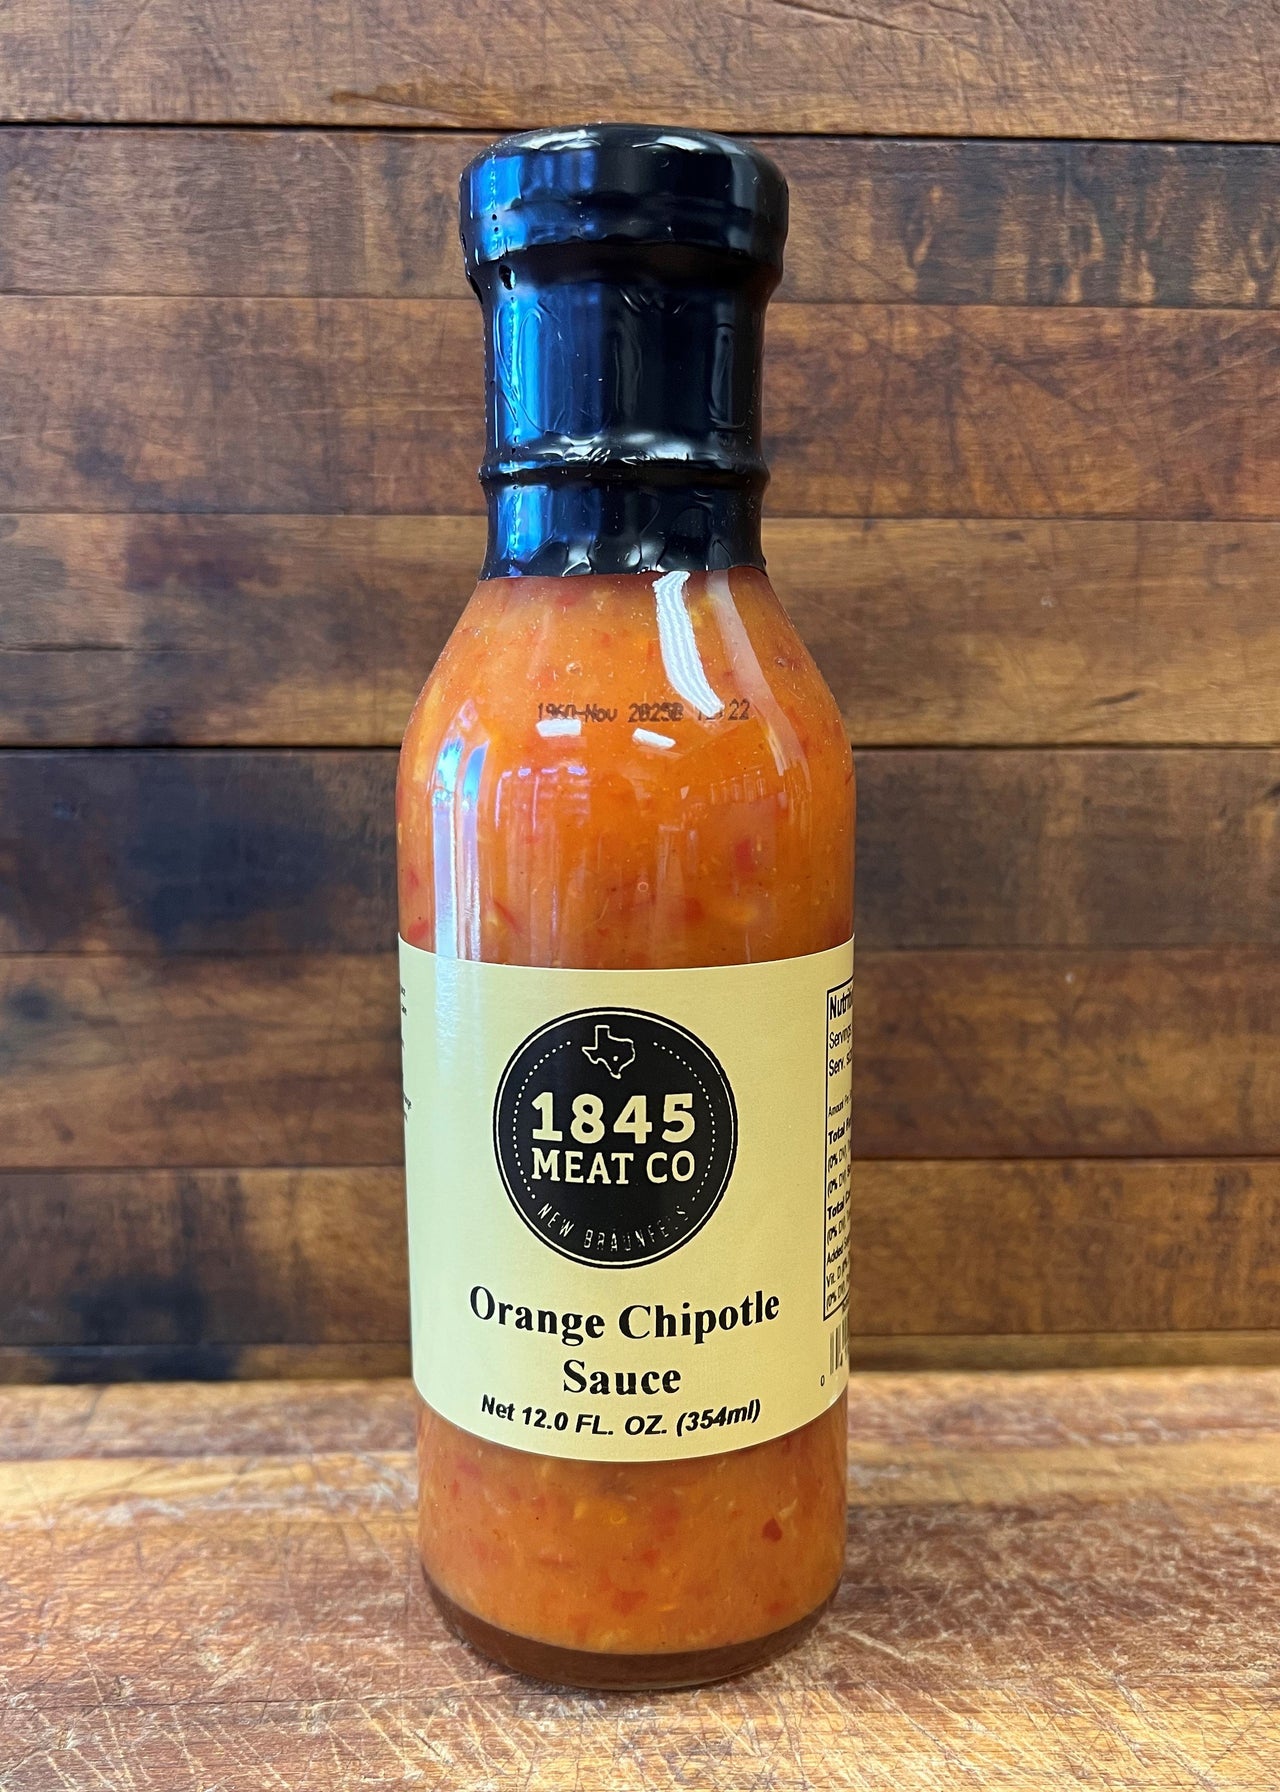 This tangy and slightly spicy Orange Chipotle Sauce is a perfect complement to our Smoked Turkey or Smoked Pork Tenderloin.